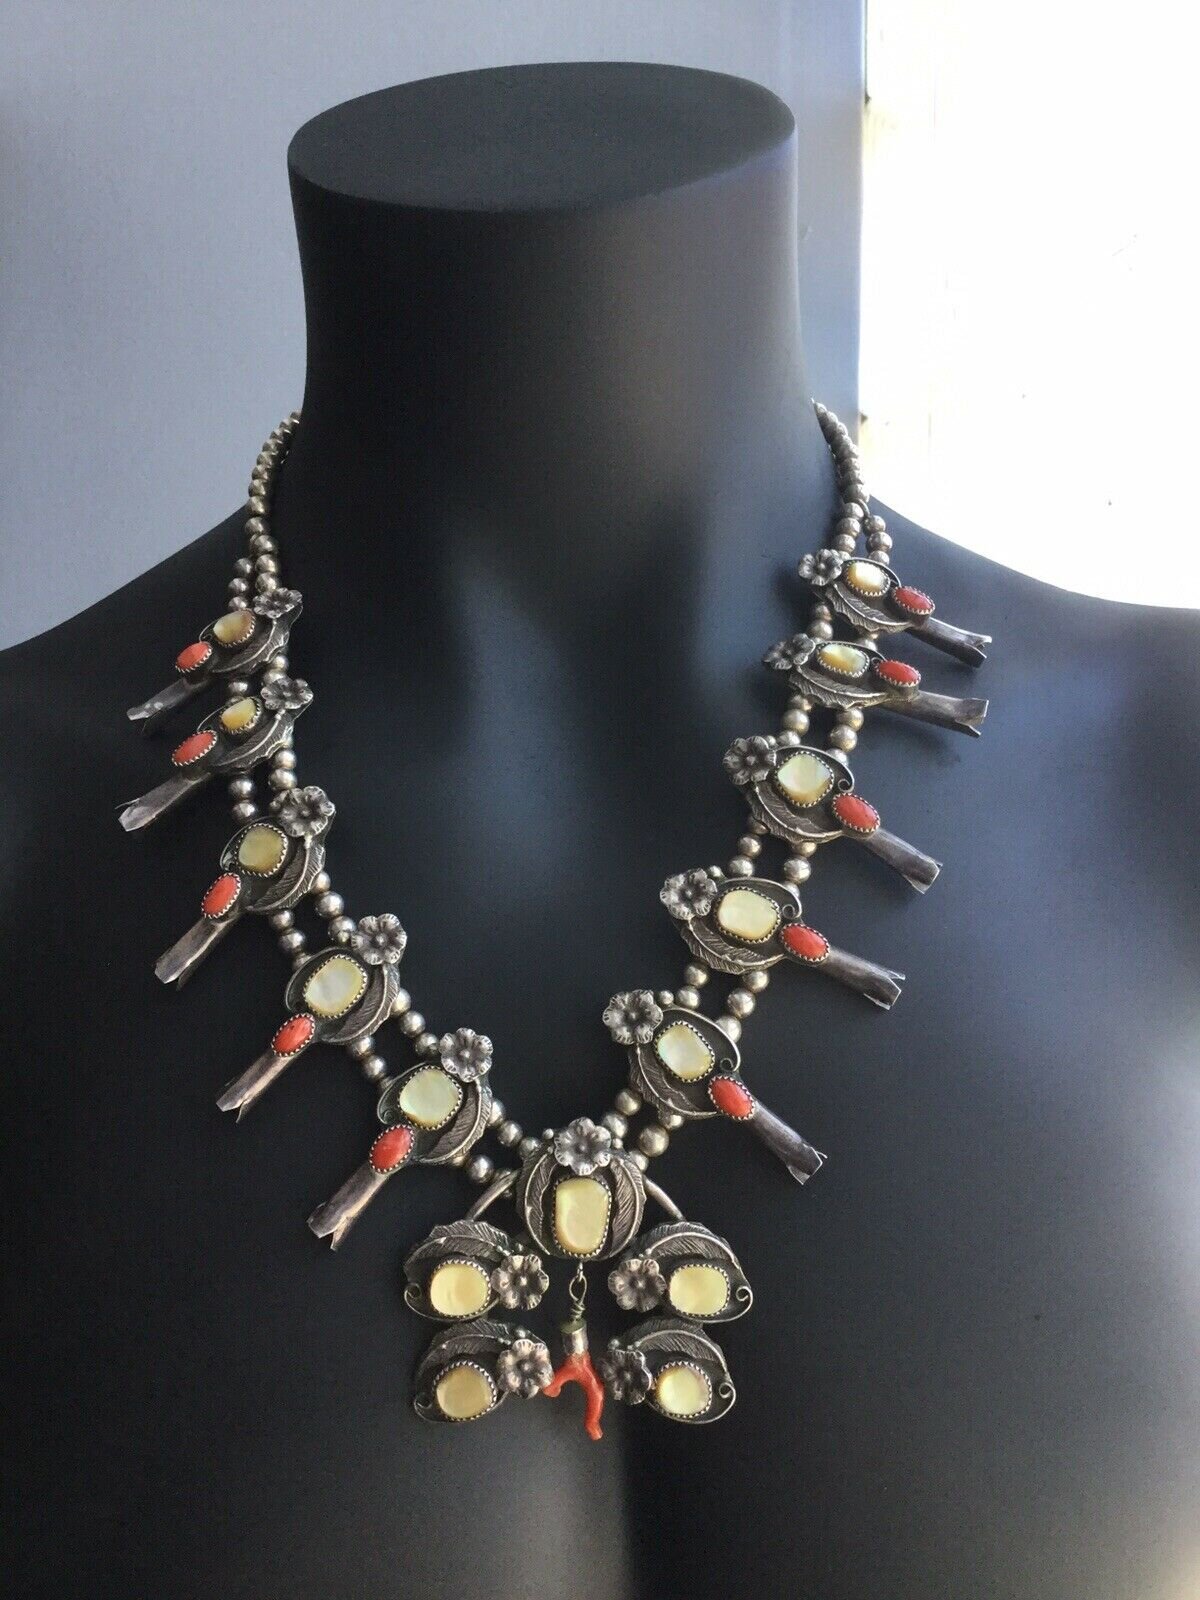 Color Blossom BB mother-of-pearl sautoir necklace